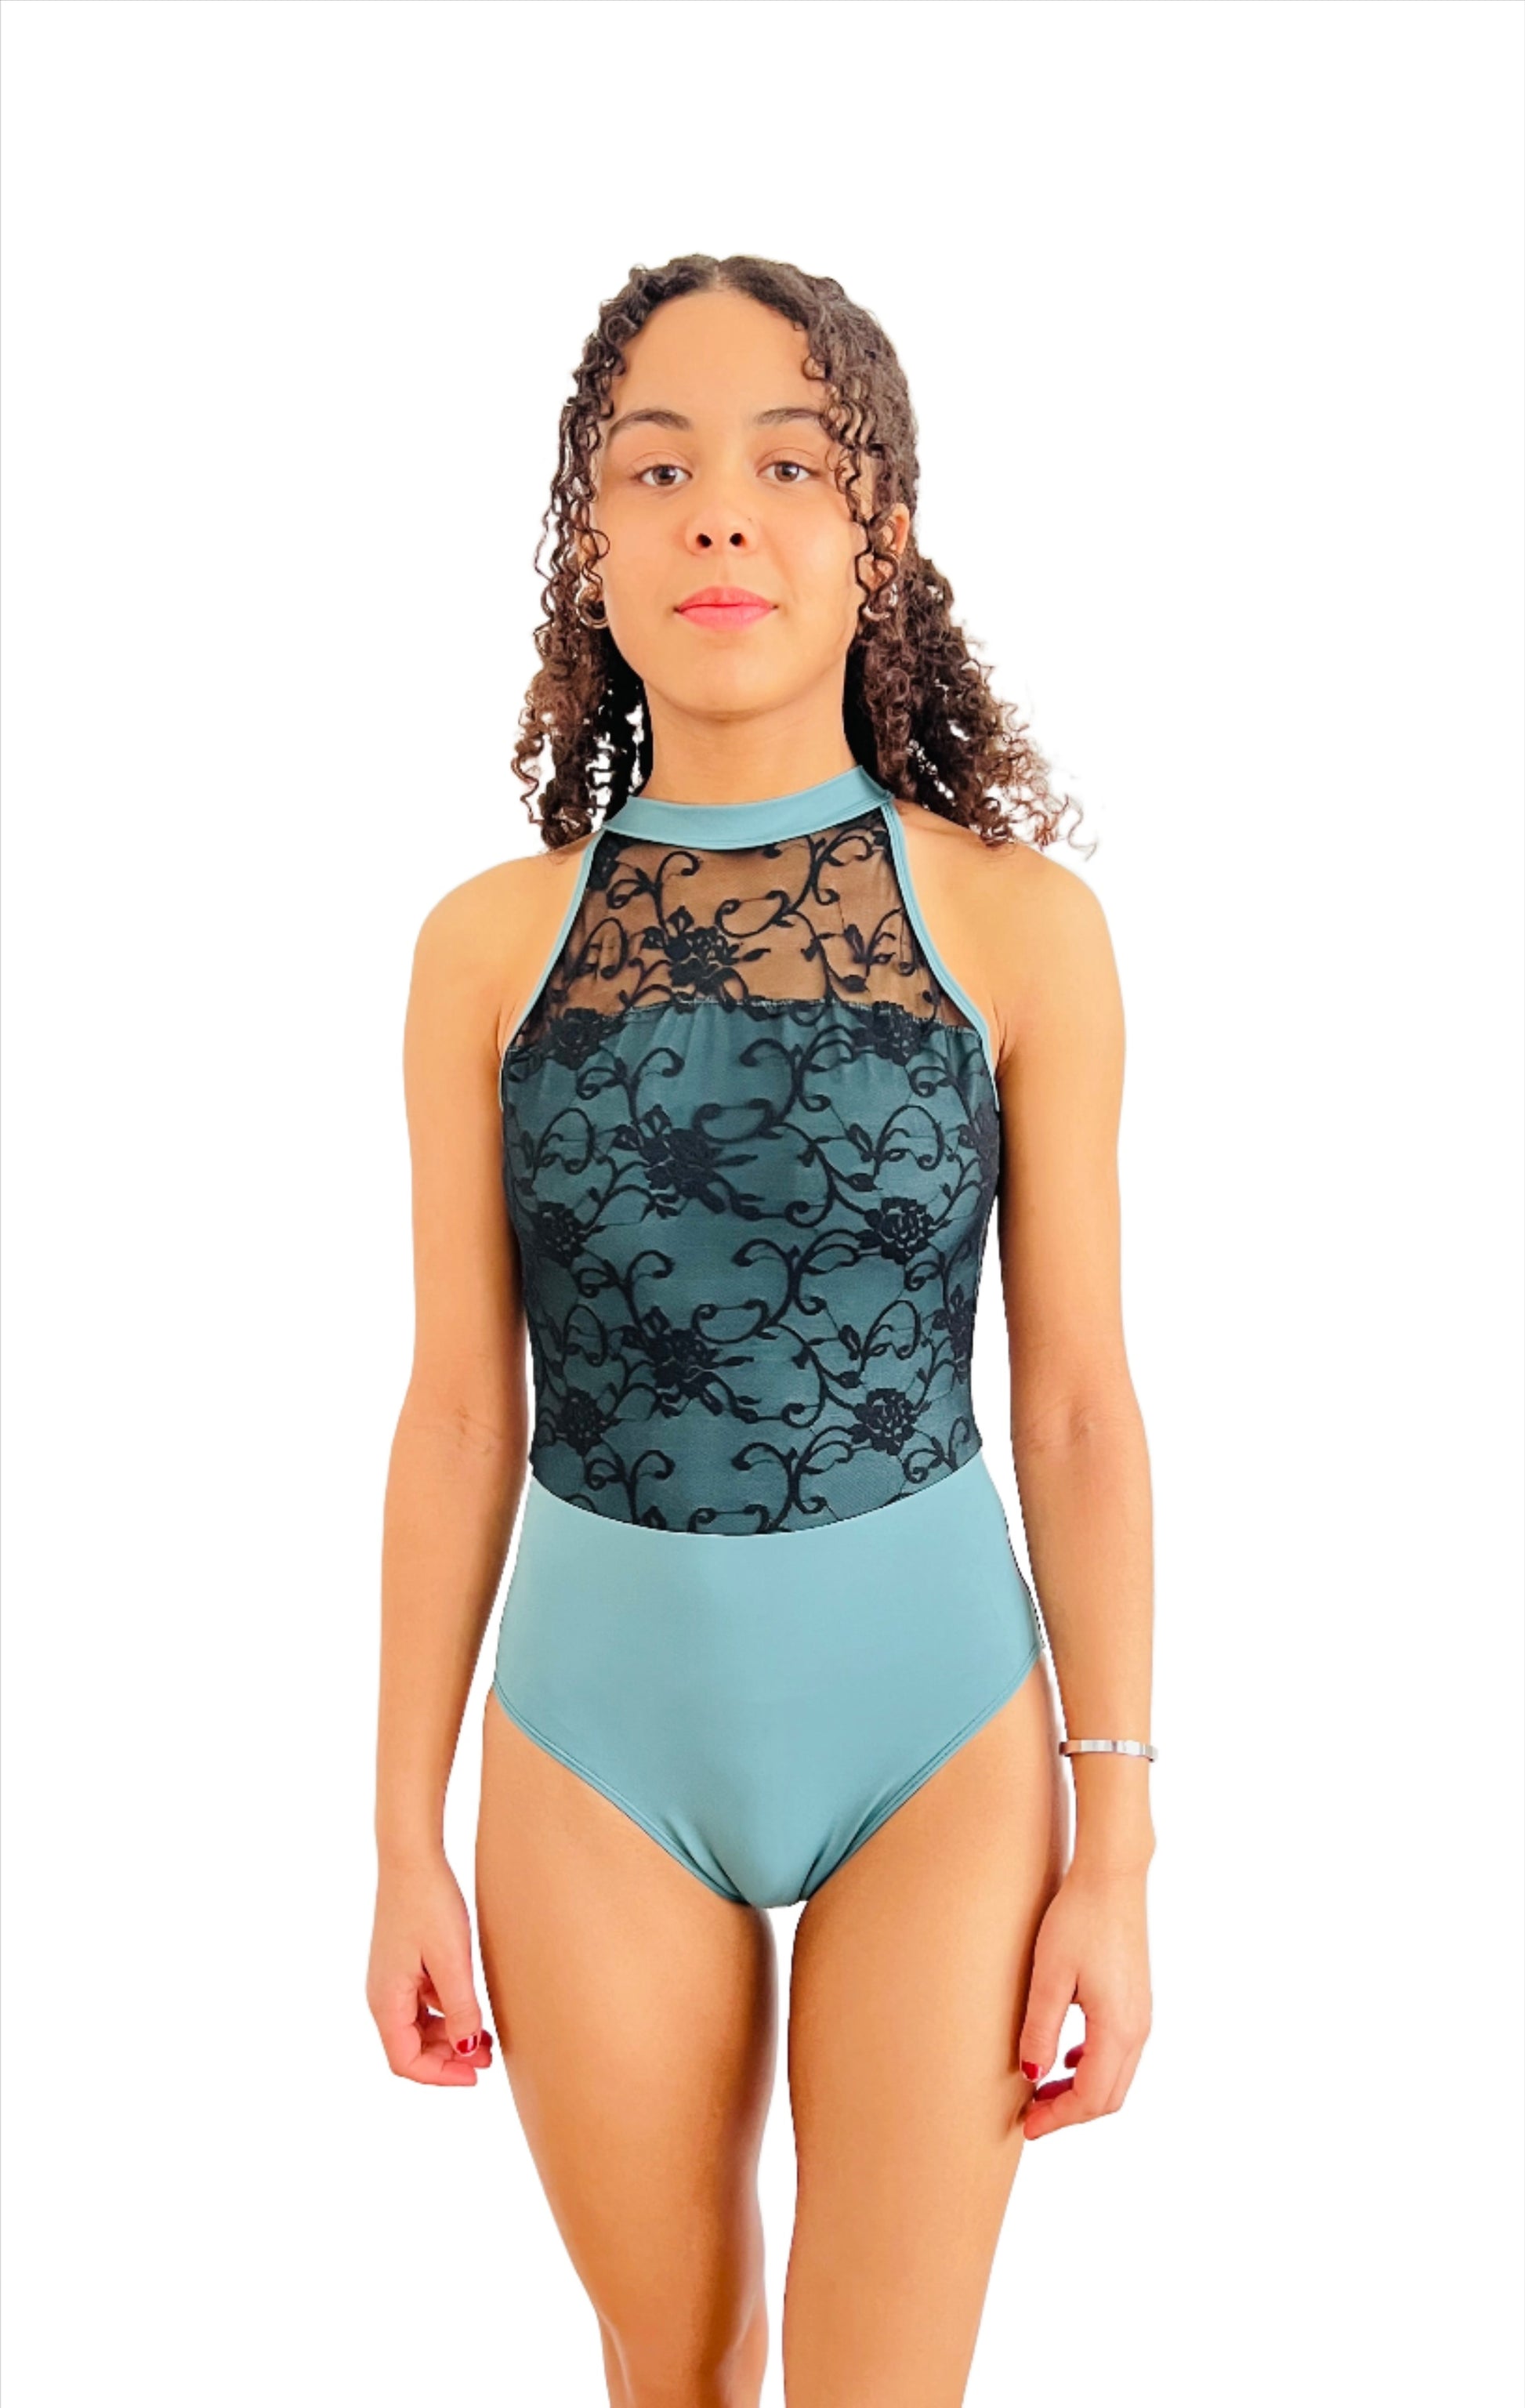 The High Neck Lace Leotard Sea Green and Black from The Collective Dancewear